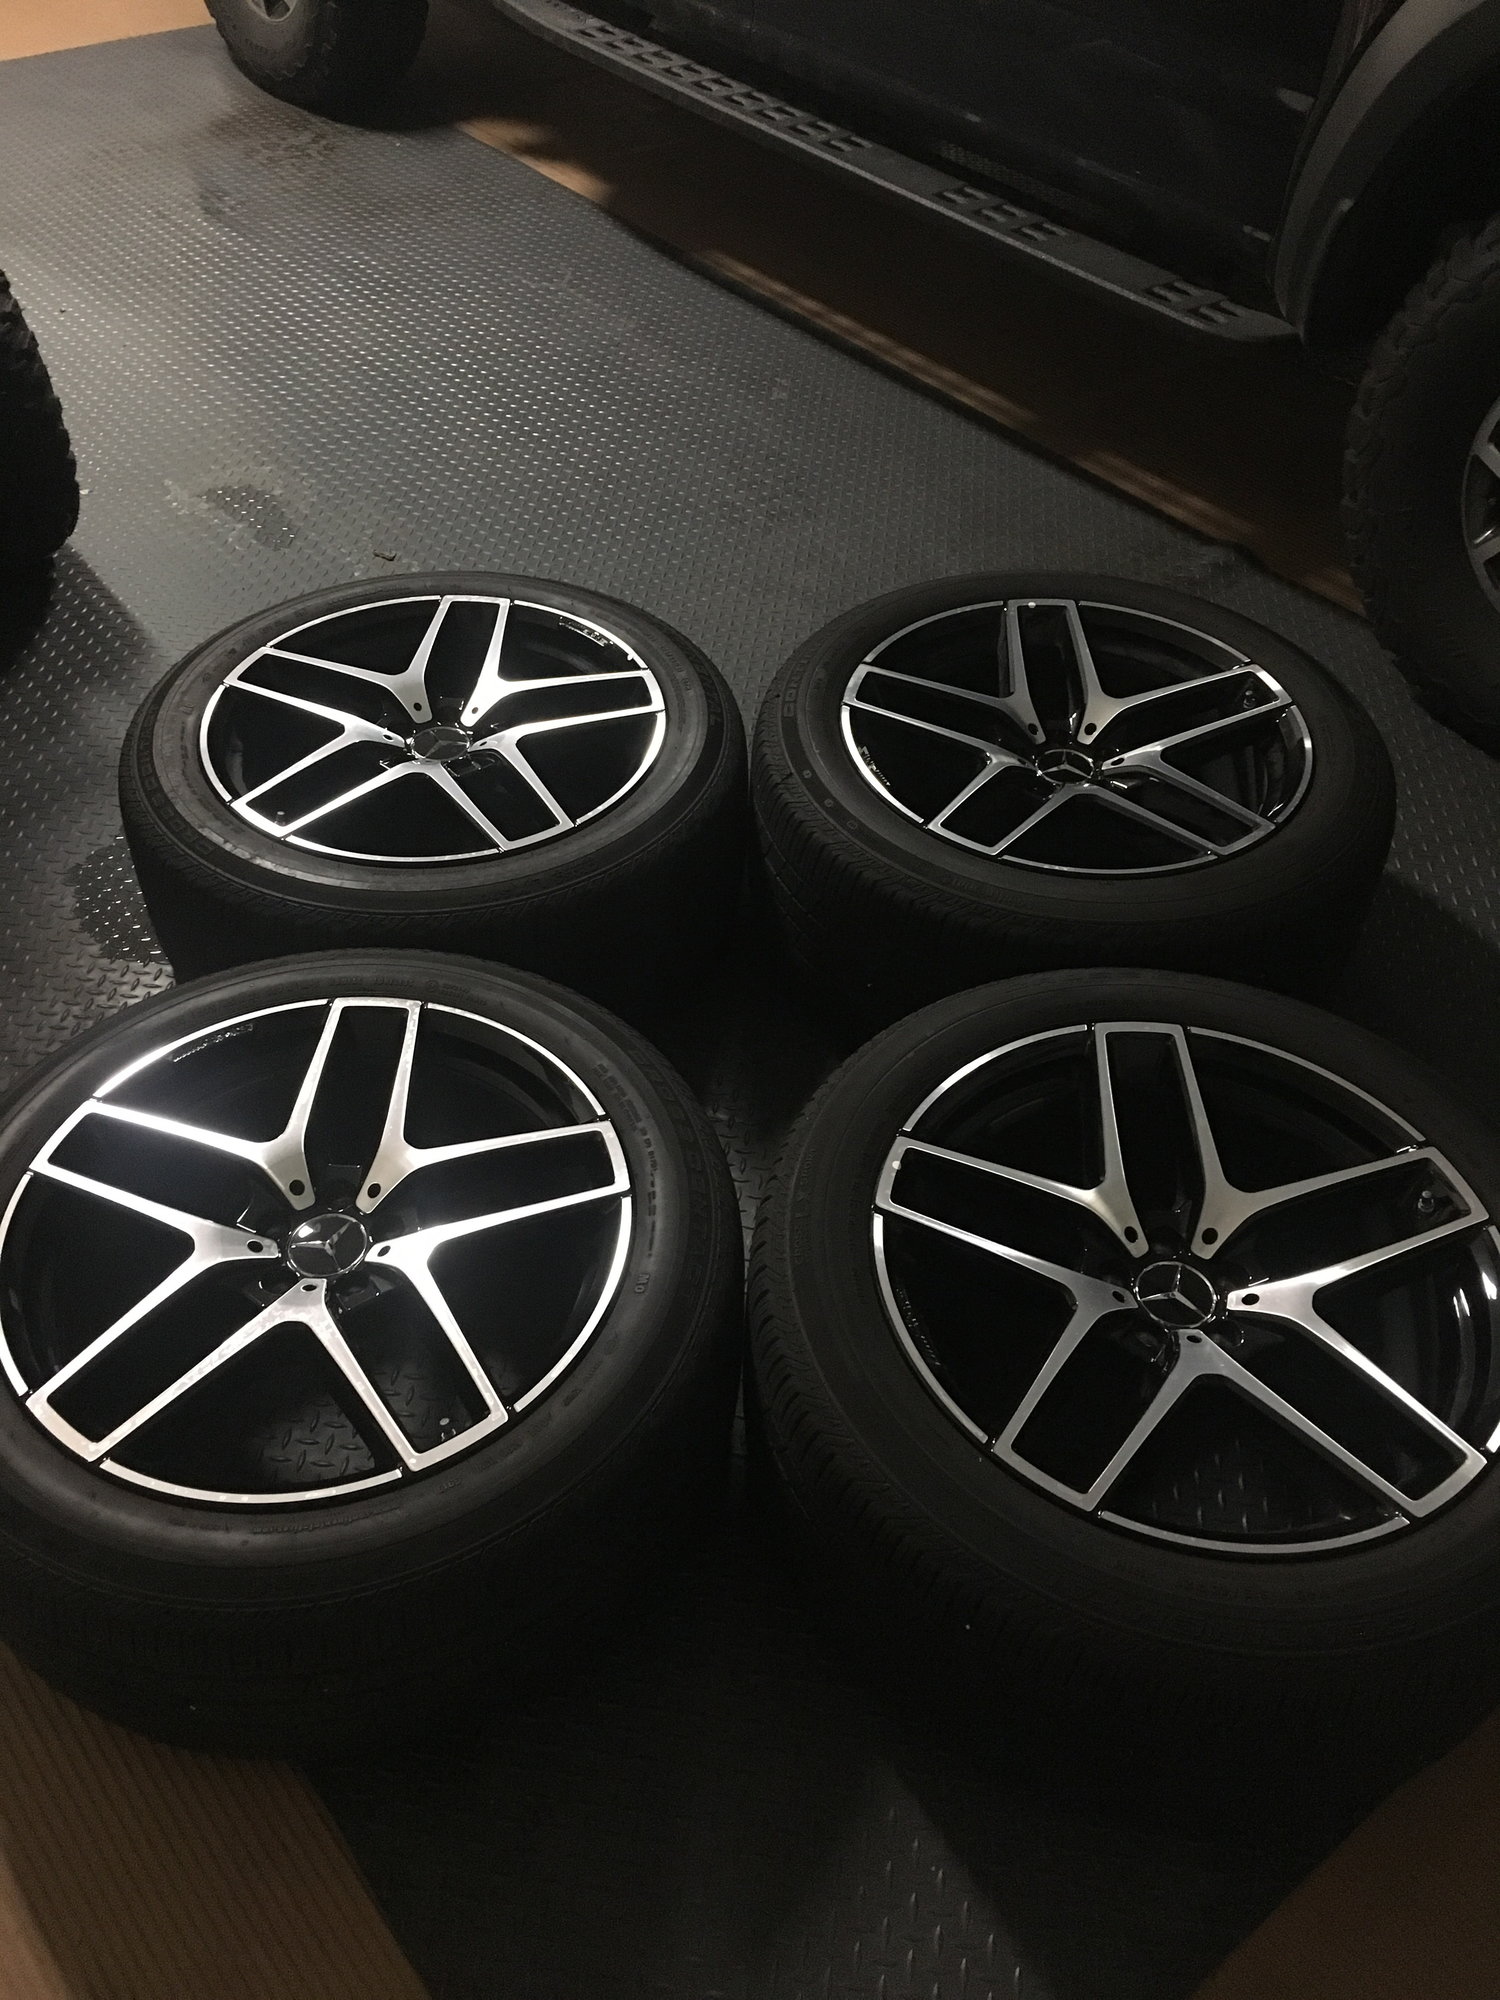 Wheels and Tires/Axles - 2018 GLE 43 Coupe 21" 5 Spoke OE Wheels - Used - 2016 to 2019 Mercedes-Benz GLE43 AMG - 2016 to 2019 Mercedes-Benz GLE63 AMG - 2015 to 2017 Mercedes-Benz GLE450 AMG - Austin, TX 78734, United States